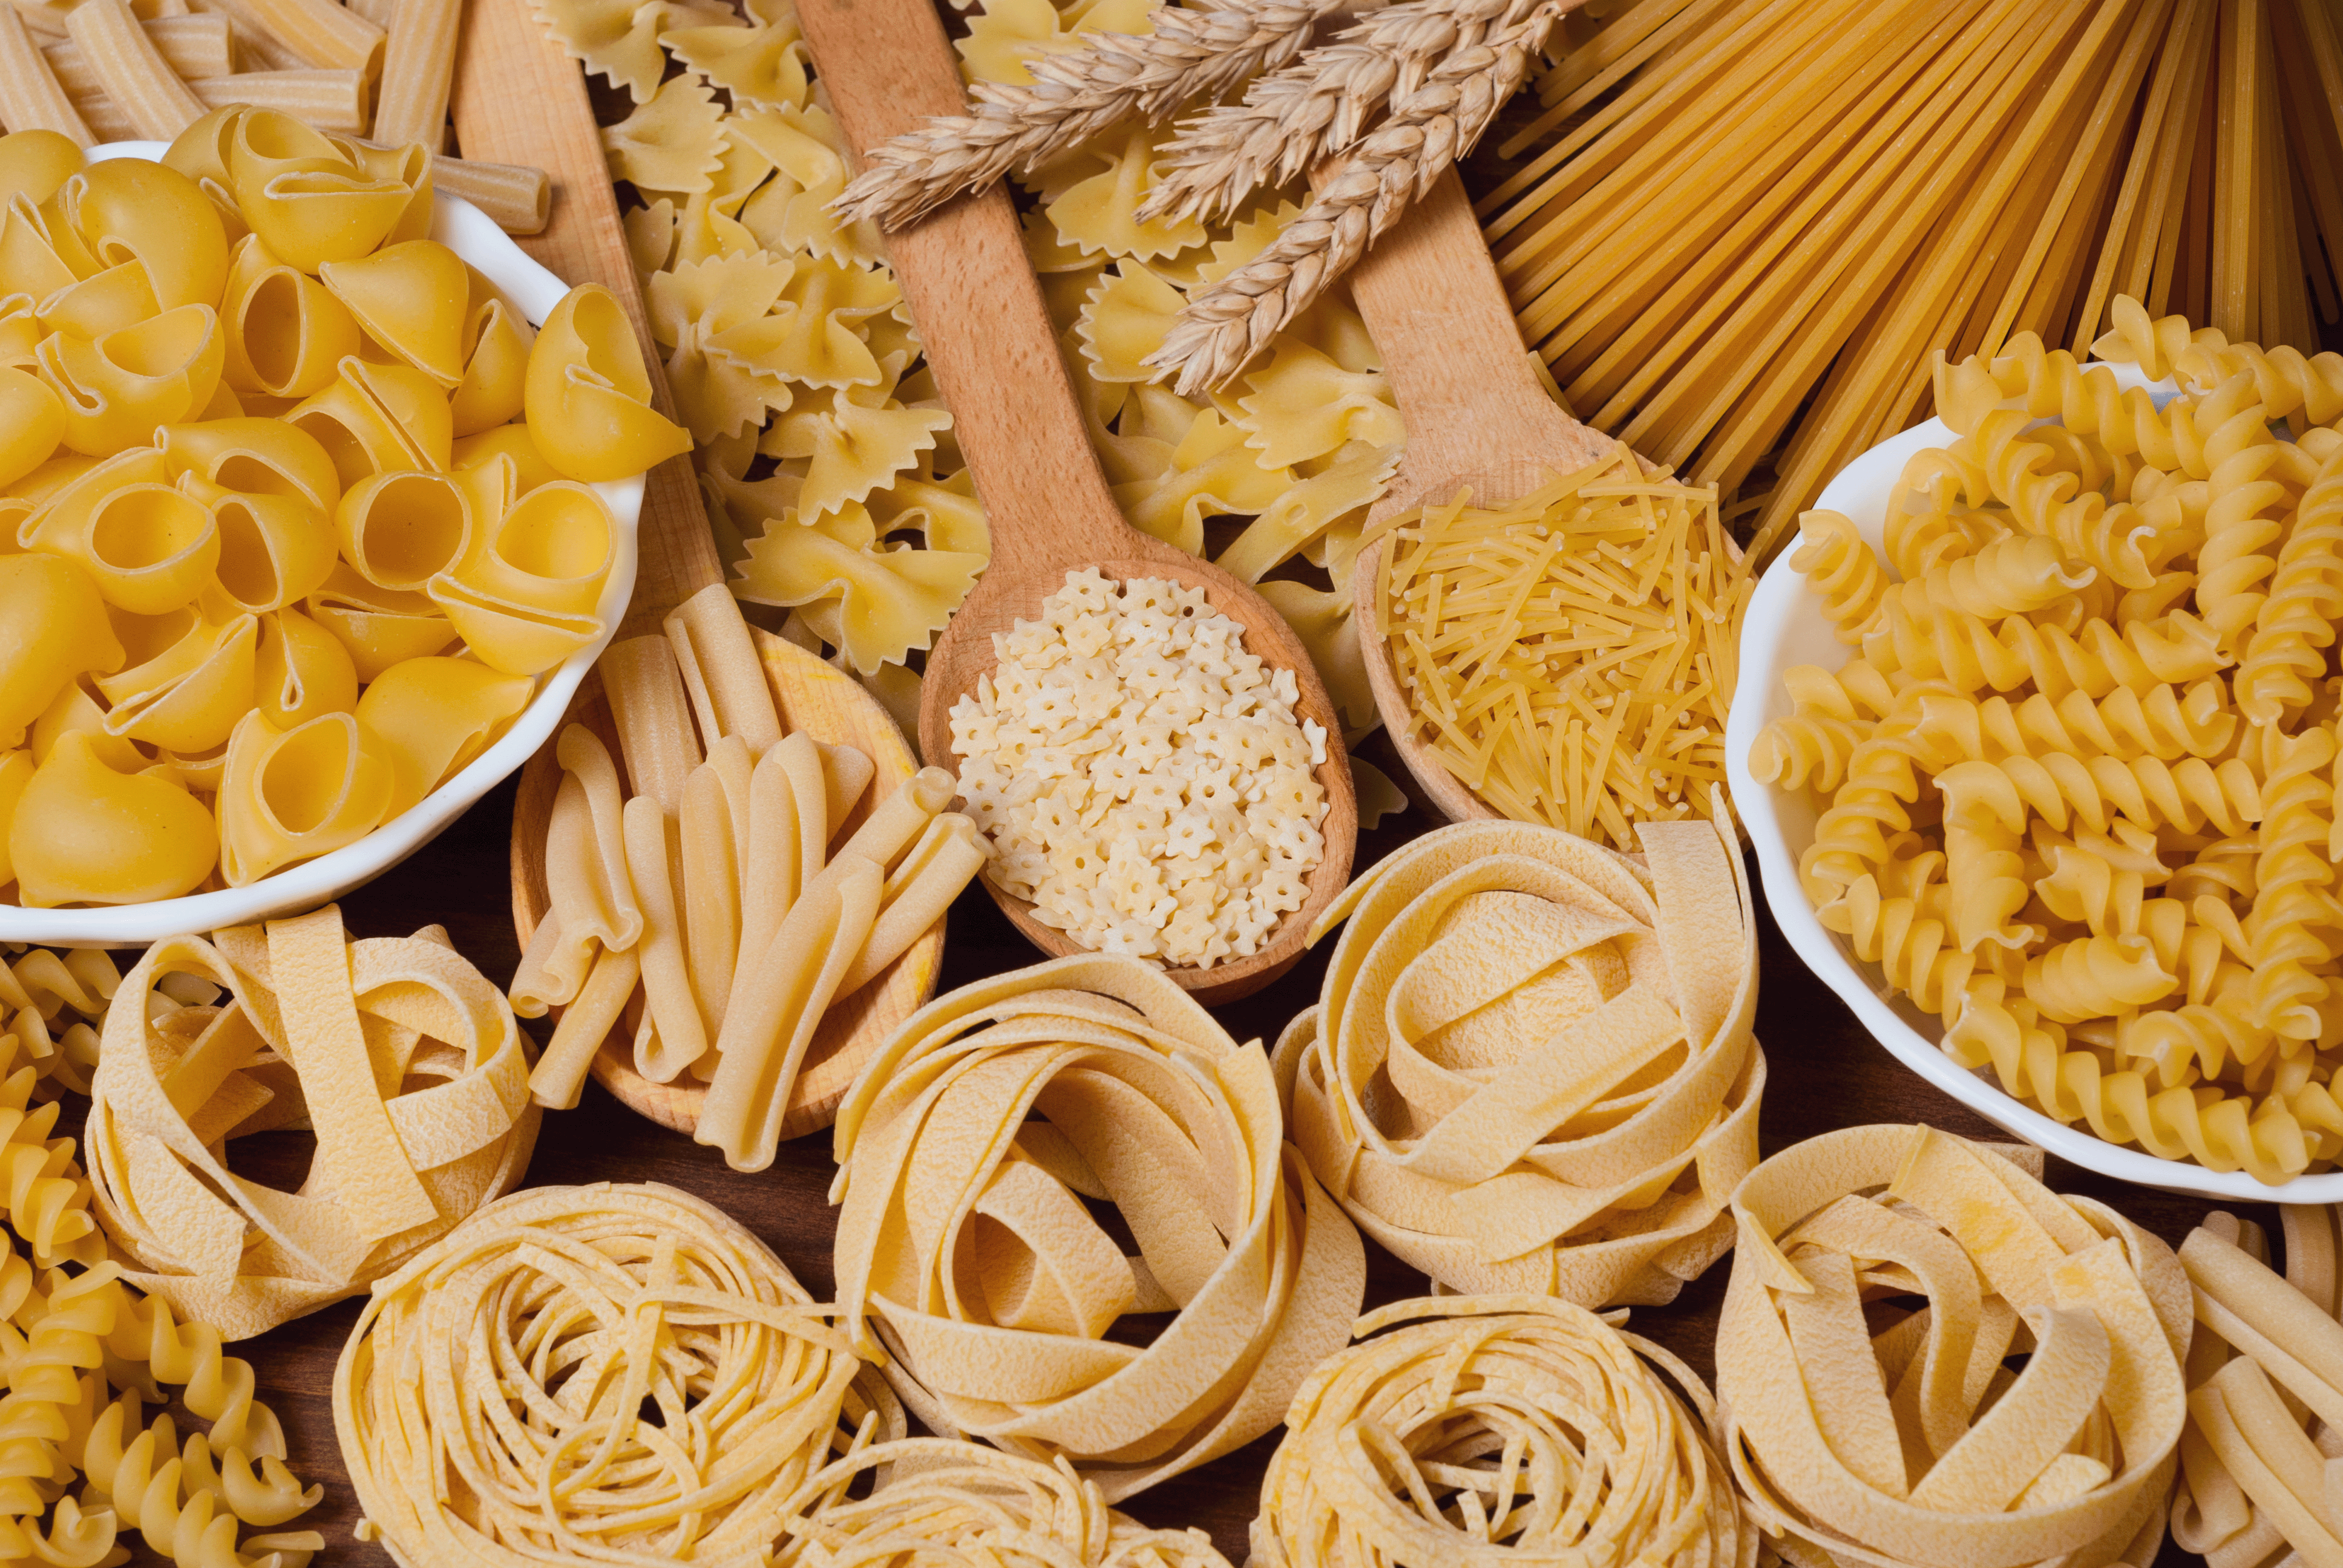 How to Measure Moisture Content in Food Products